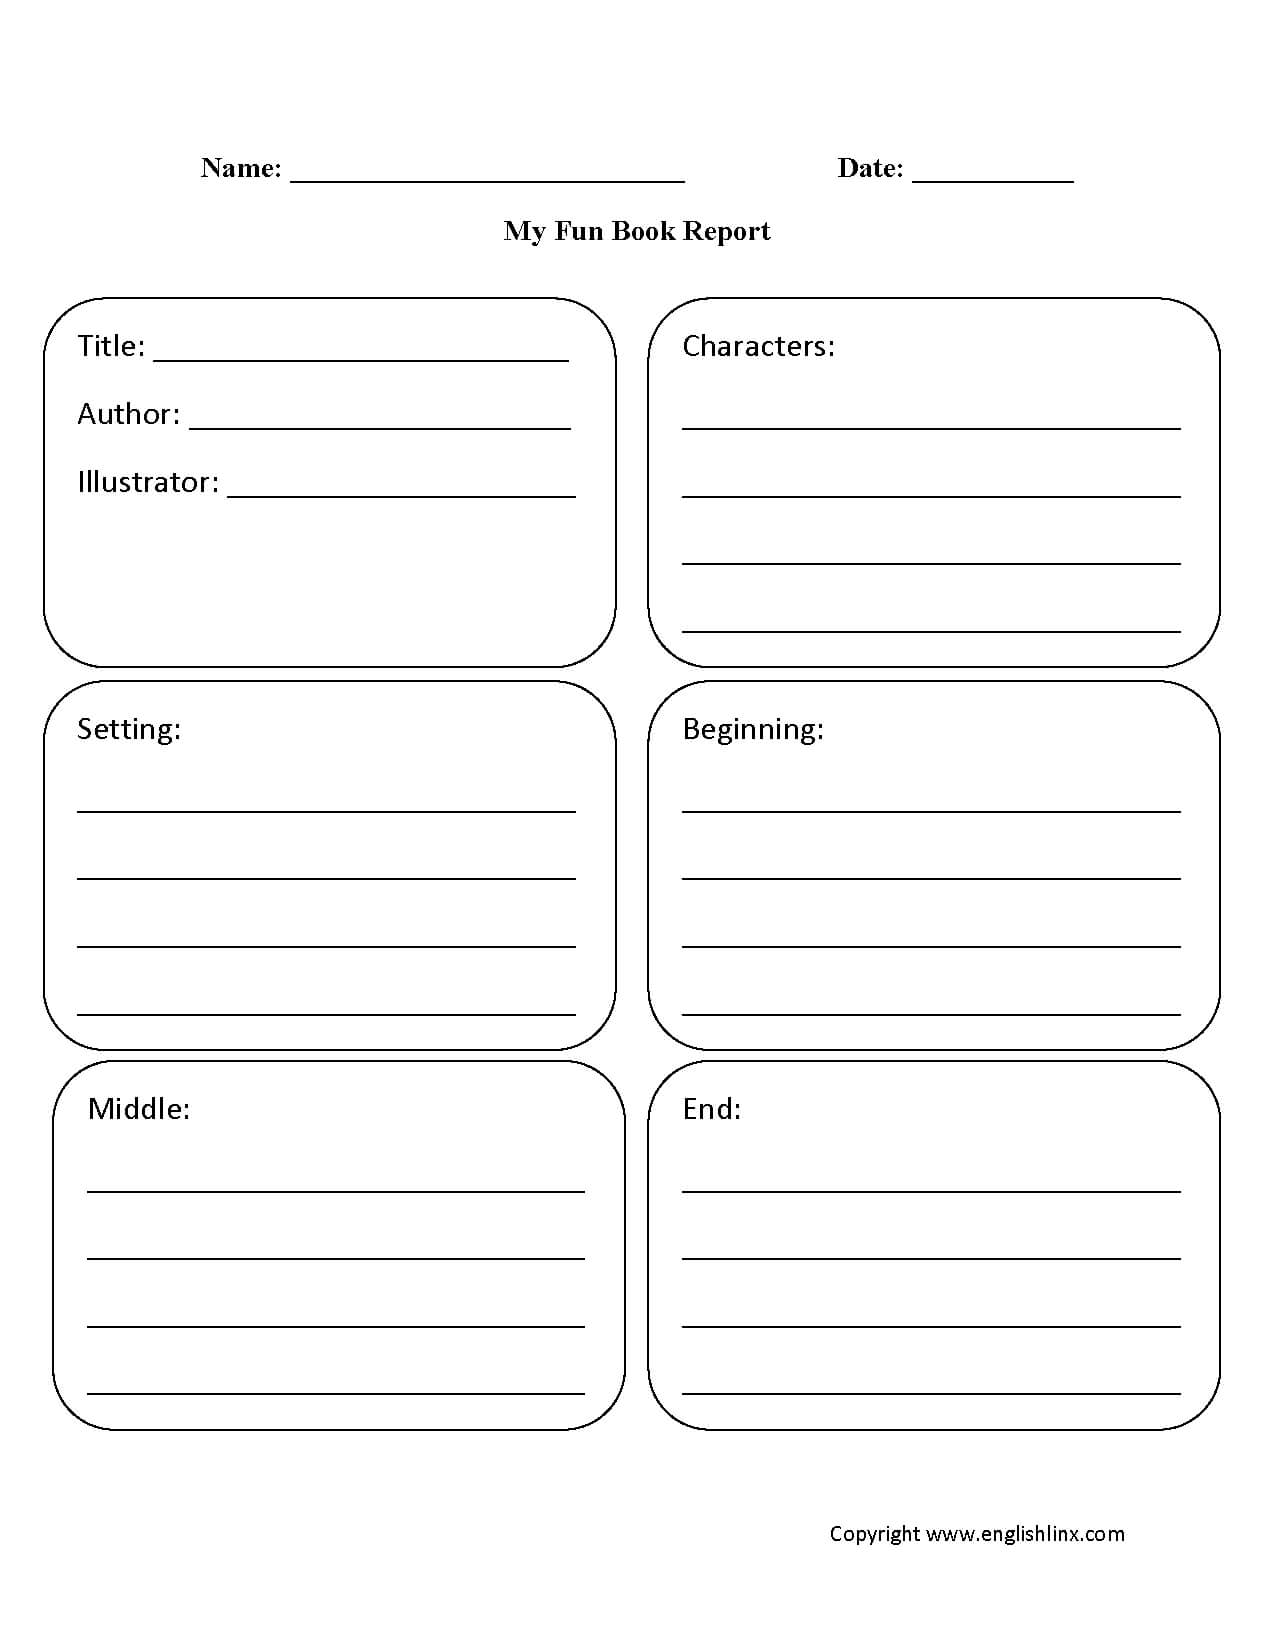 Financial Tatements Template Pdf For 2Nd Grade Book Report Within Second Grade Book Report Template